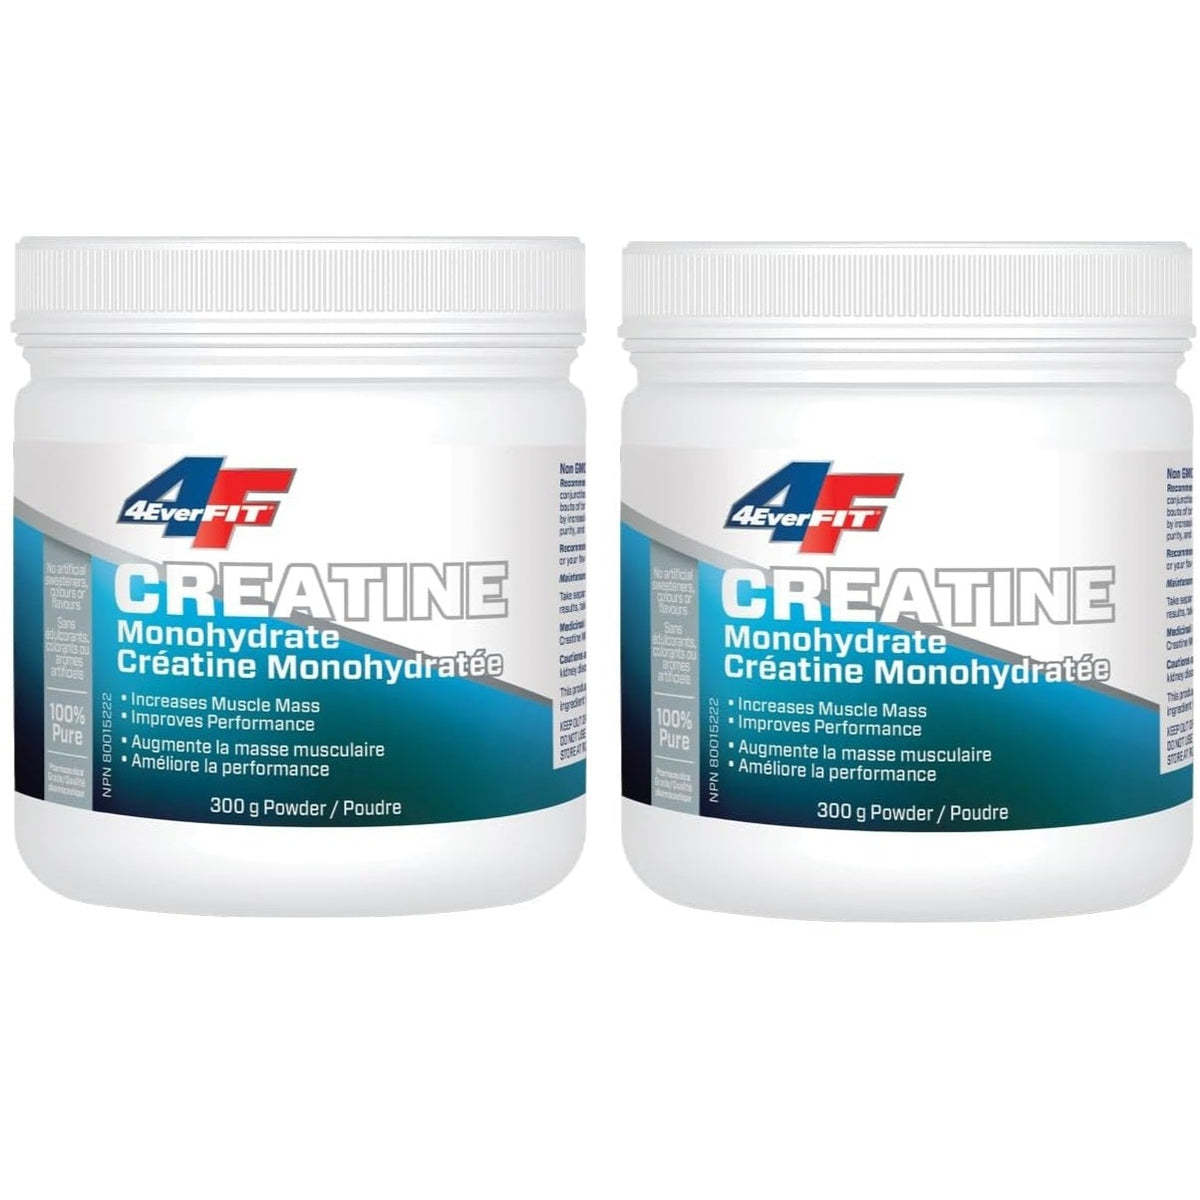 4Ever Fit Creatine Monohydrate 600g(300g+300g) combo pack Supplements - Sports at Village Vitamin Store